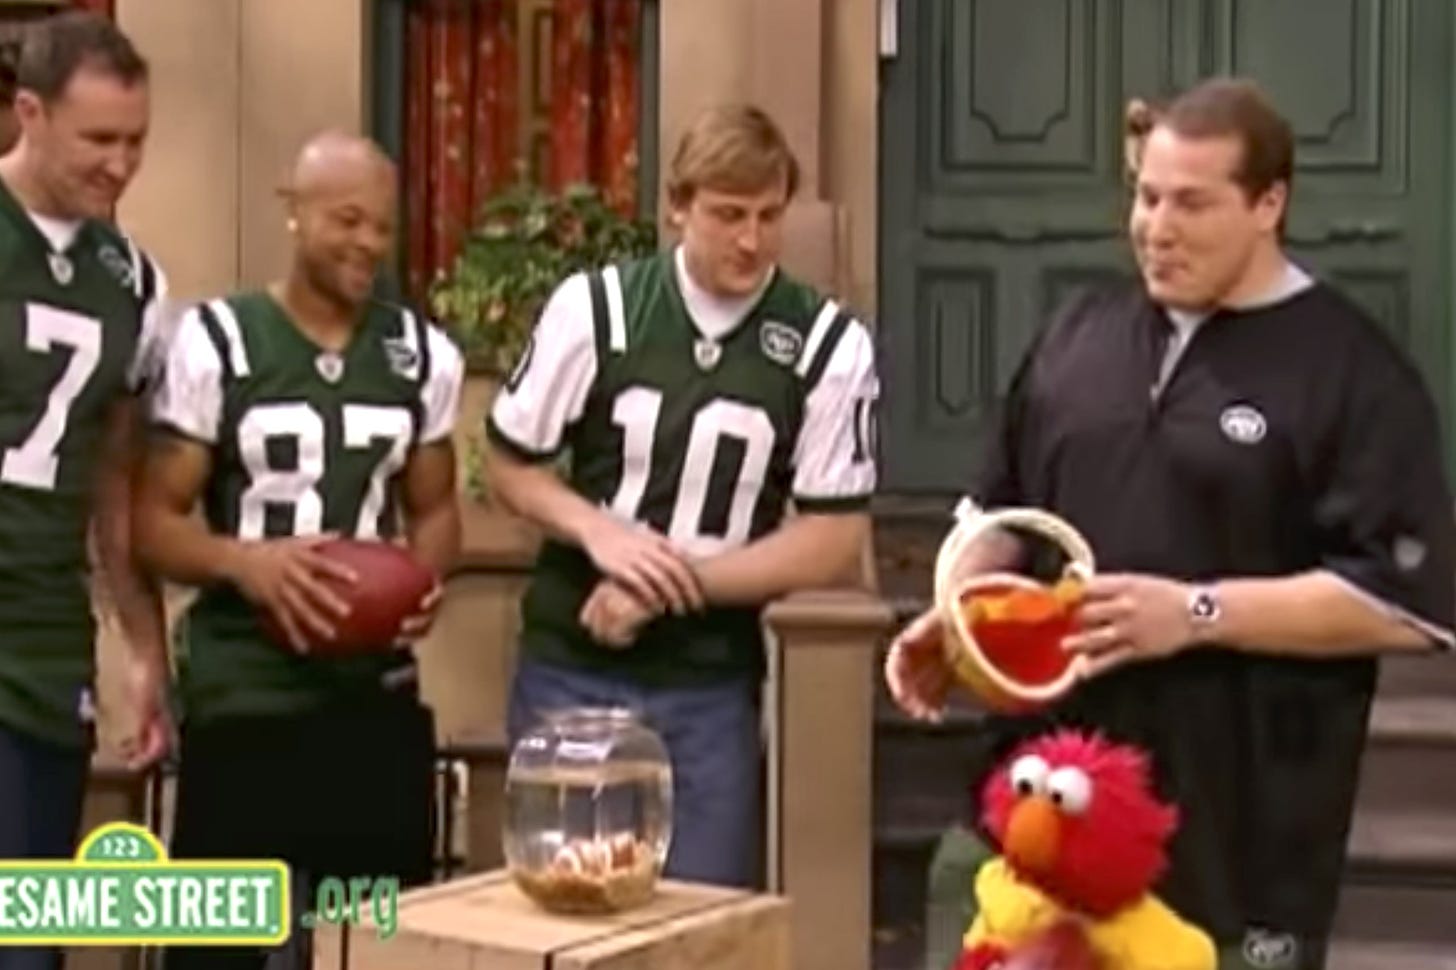 Eric Mangnini re-lives angry 'Sesame Street' run-in after Jets loss